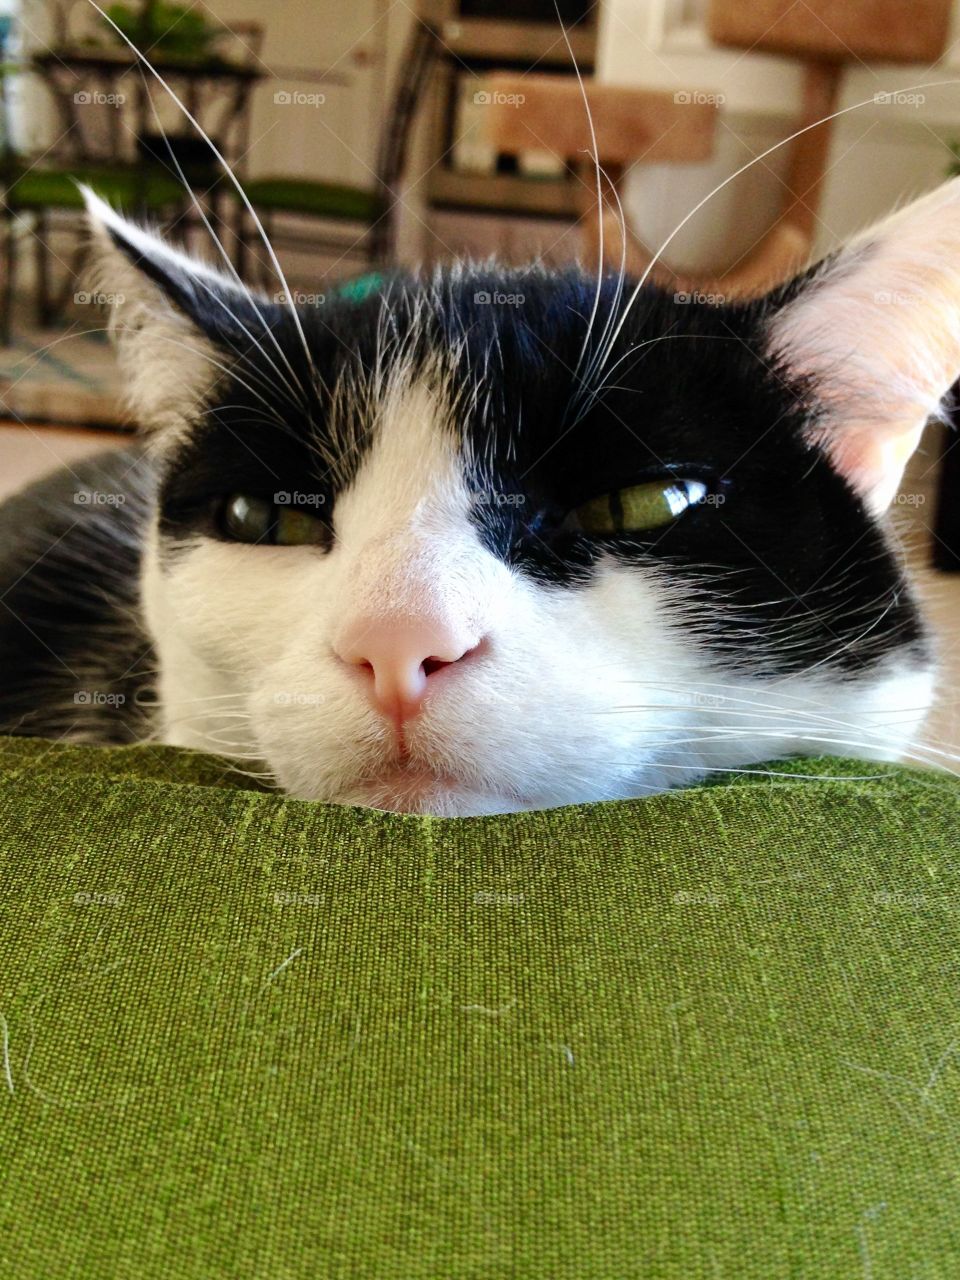 Close up of cat face on a pillow.